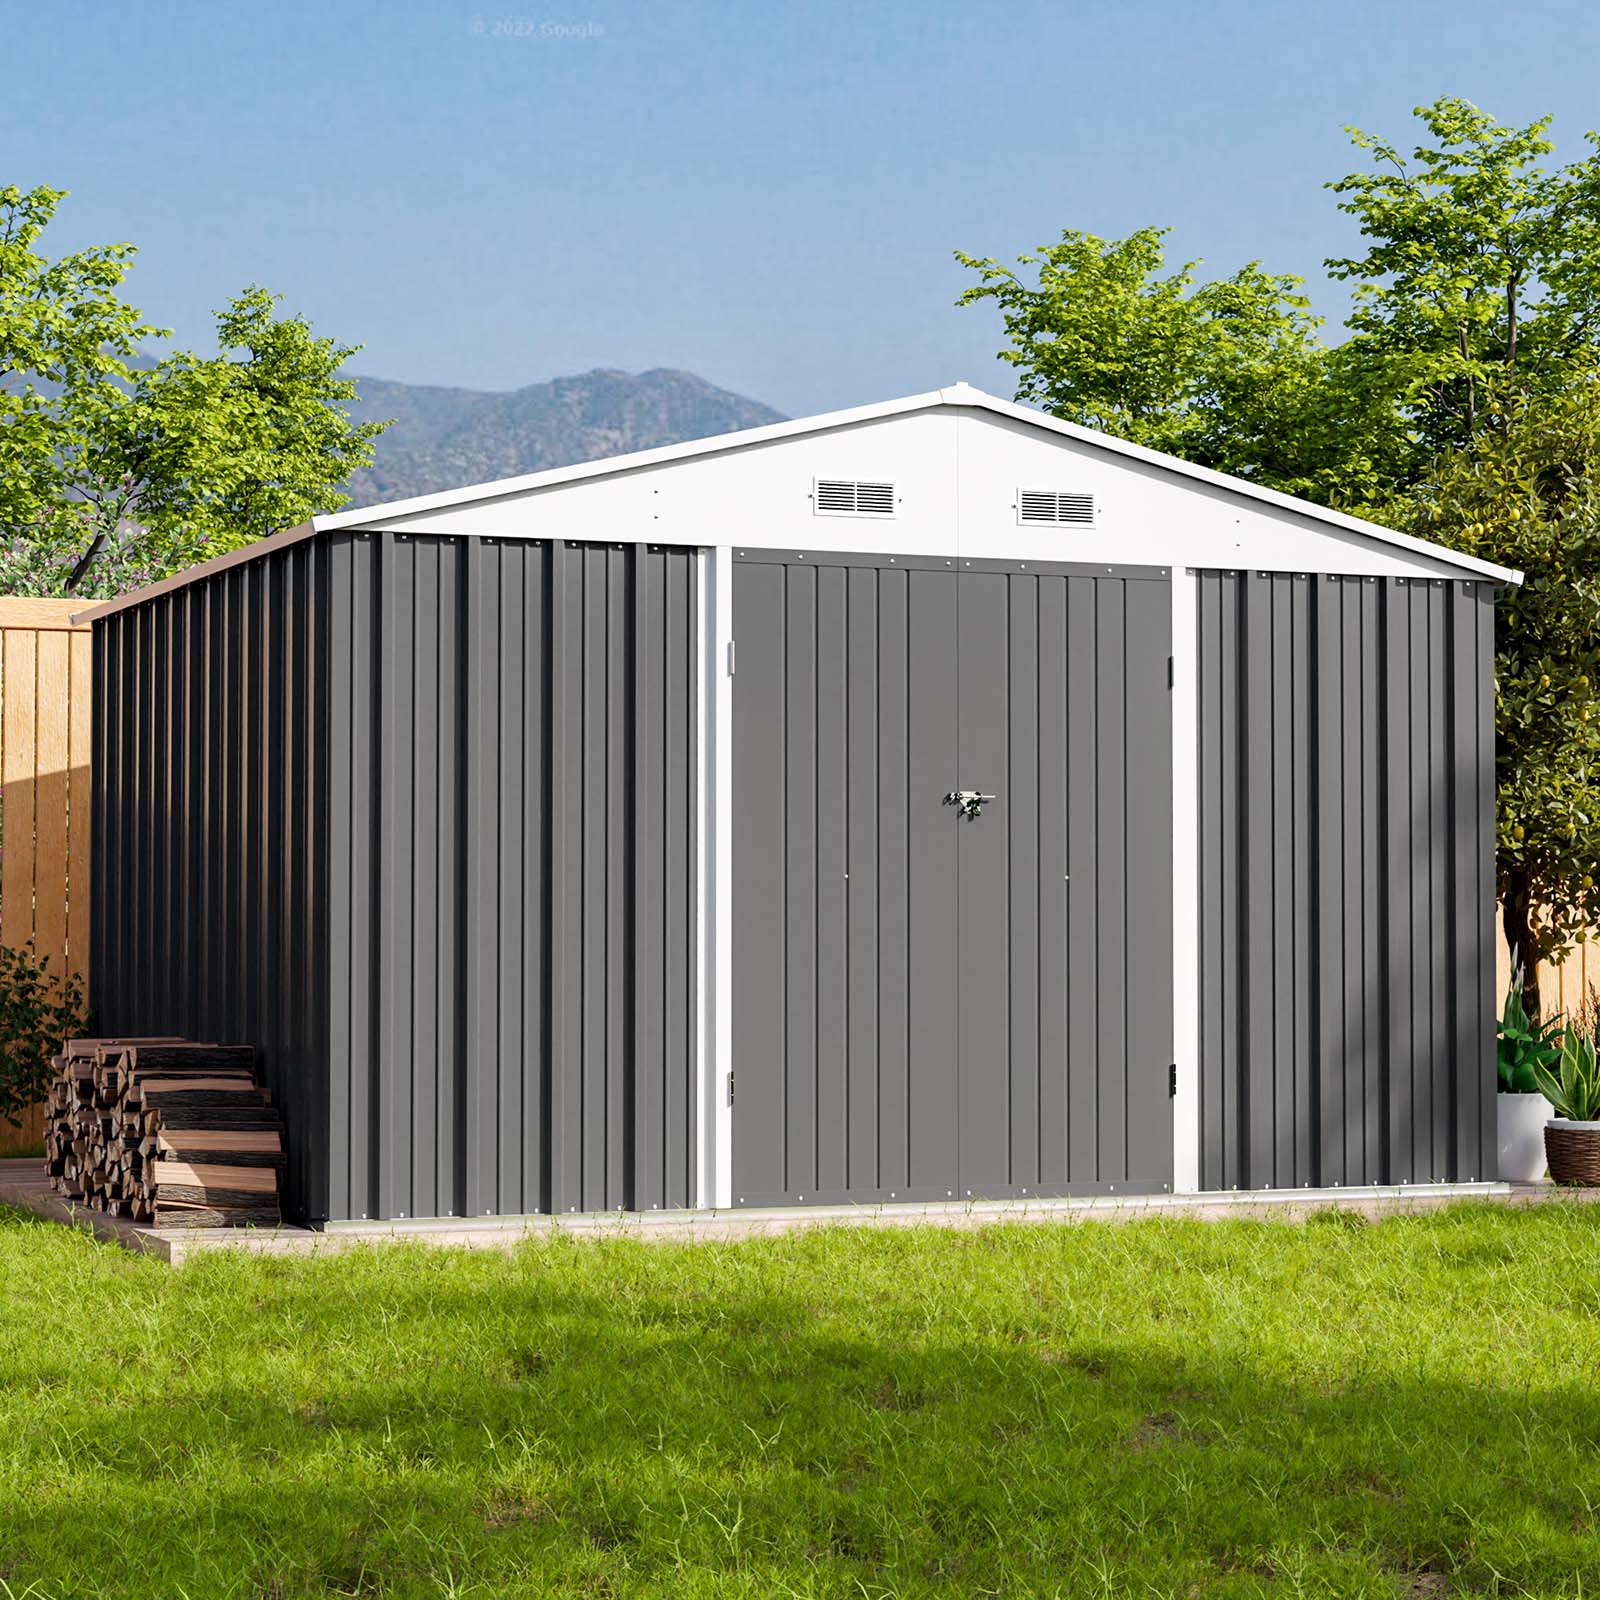 

10 X 8 Ft Metal Outdoor Storage Shed, Large Steel Utility Tool Shed Storage House With Lockable Door, Garden Tool Shed For Backyard Garden Patio Lawn